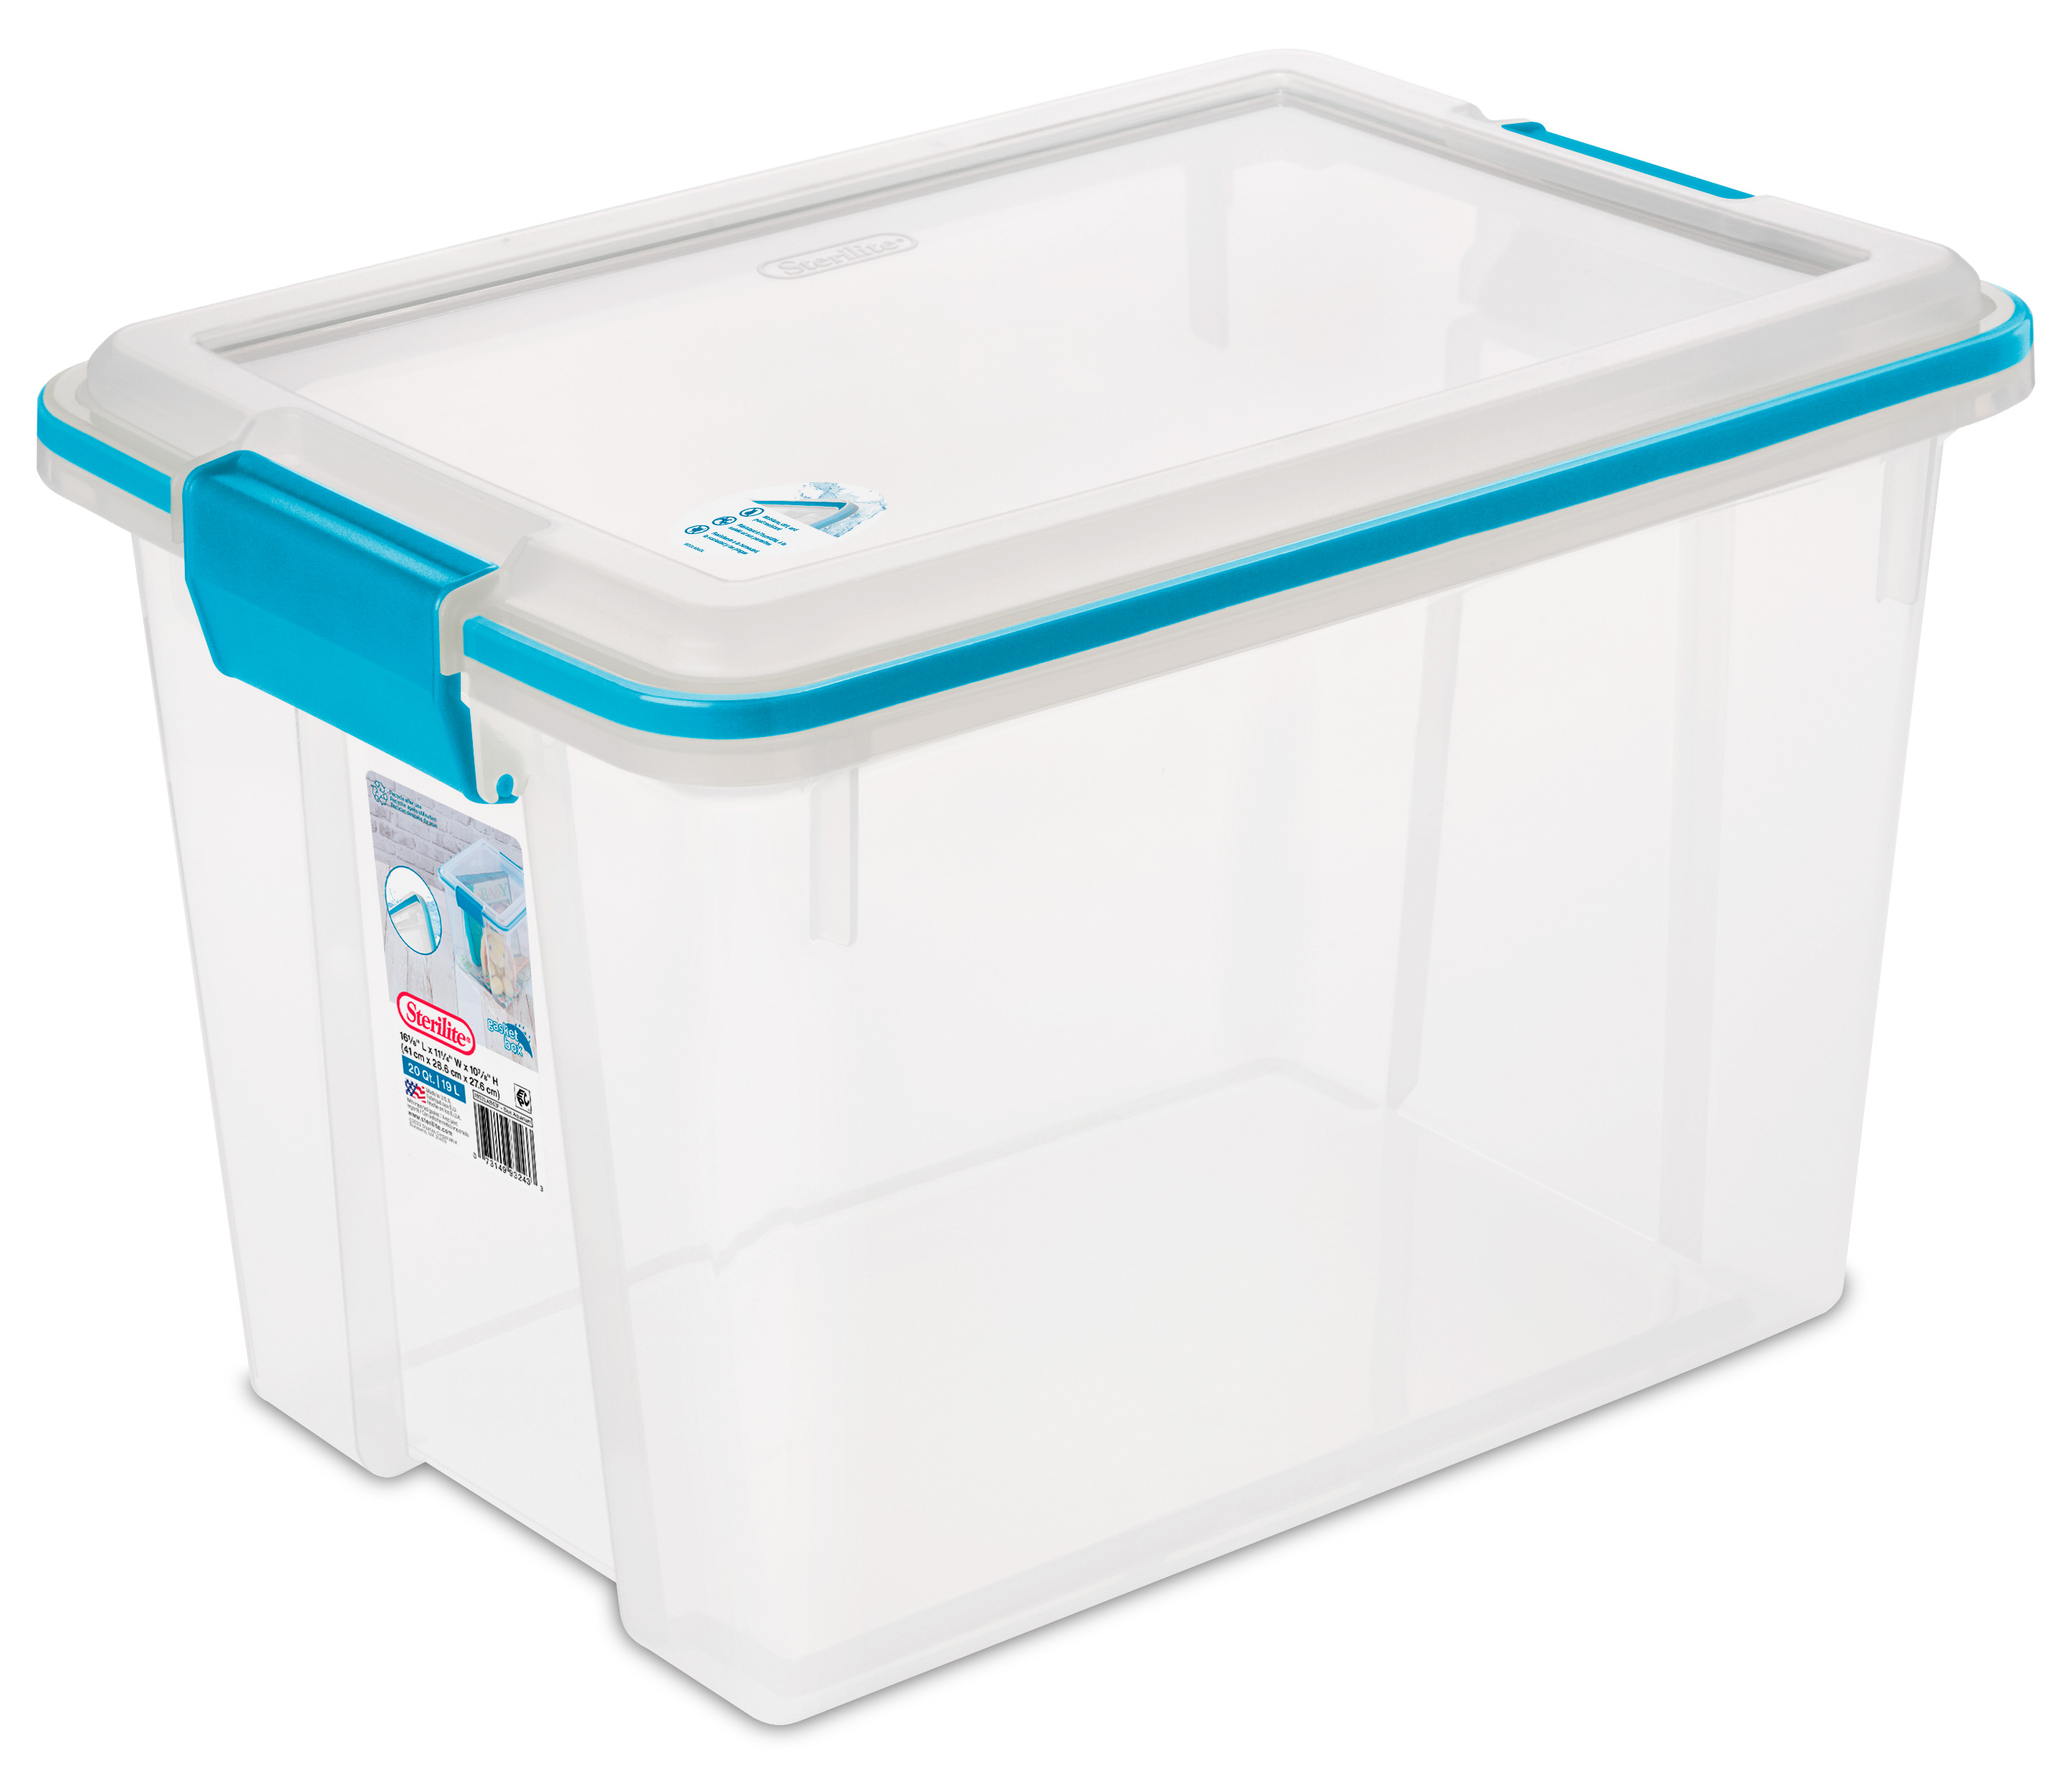 Sterilite 20 Quart Clear Gasket Box with Blue Latches & Gasket - image 1 of 9